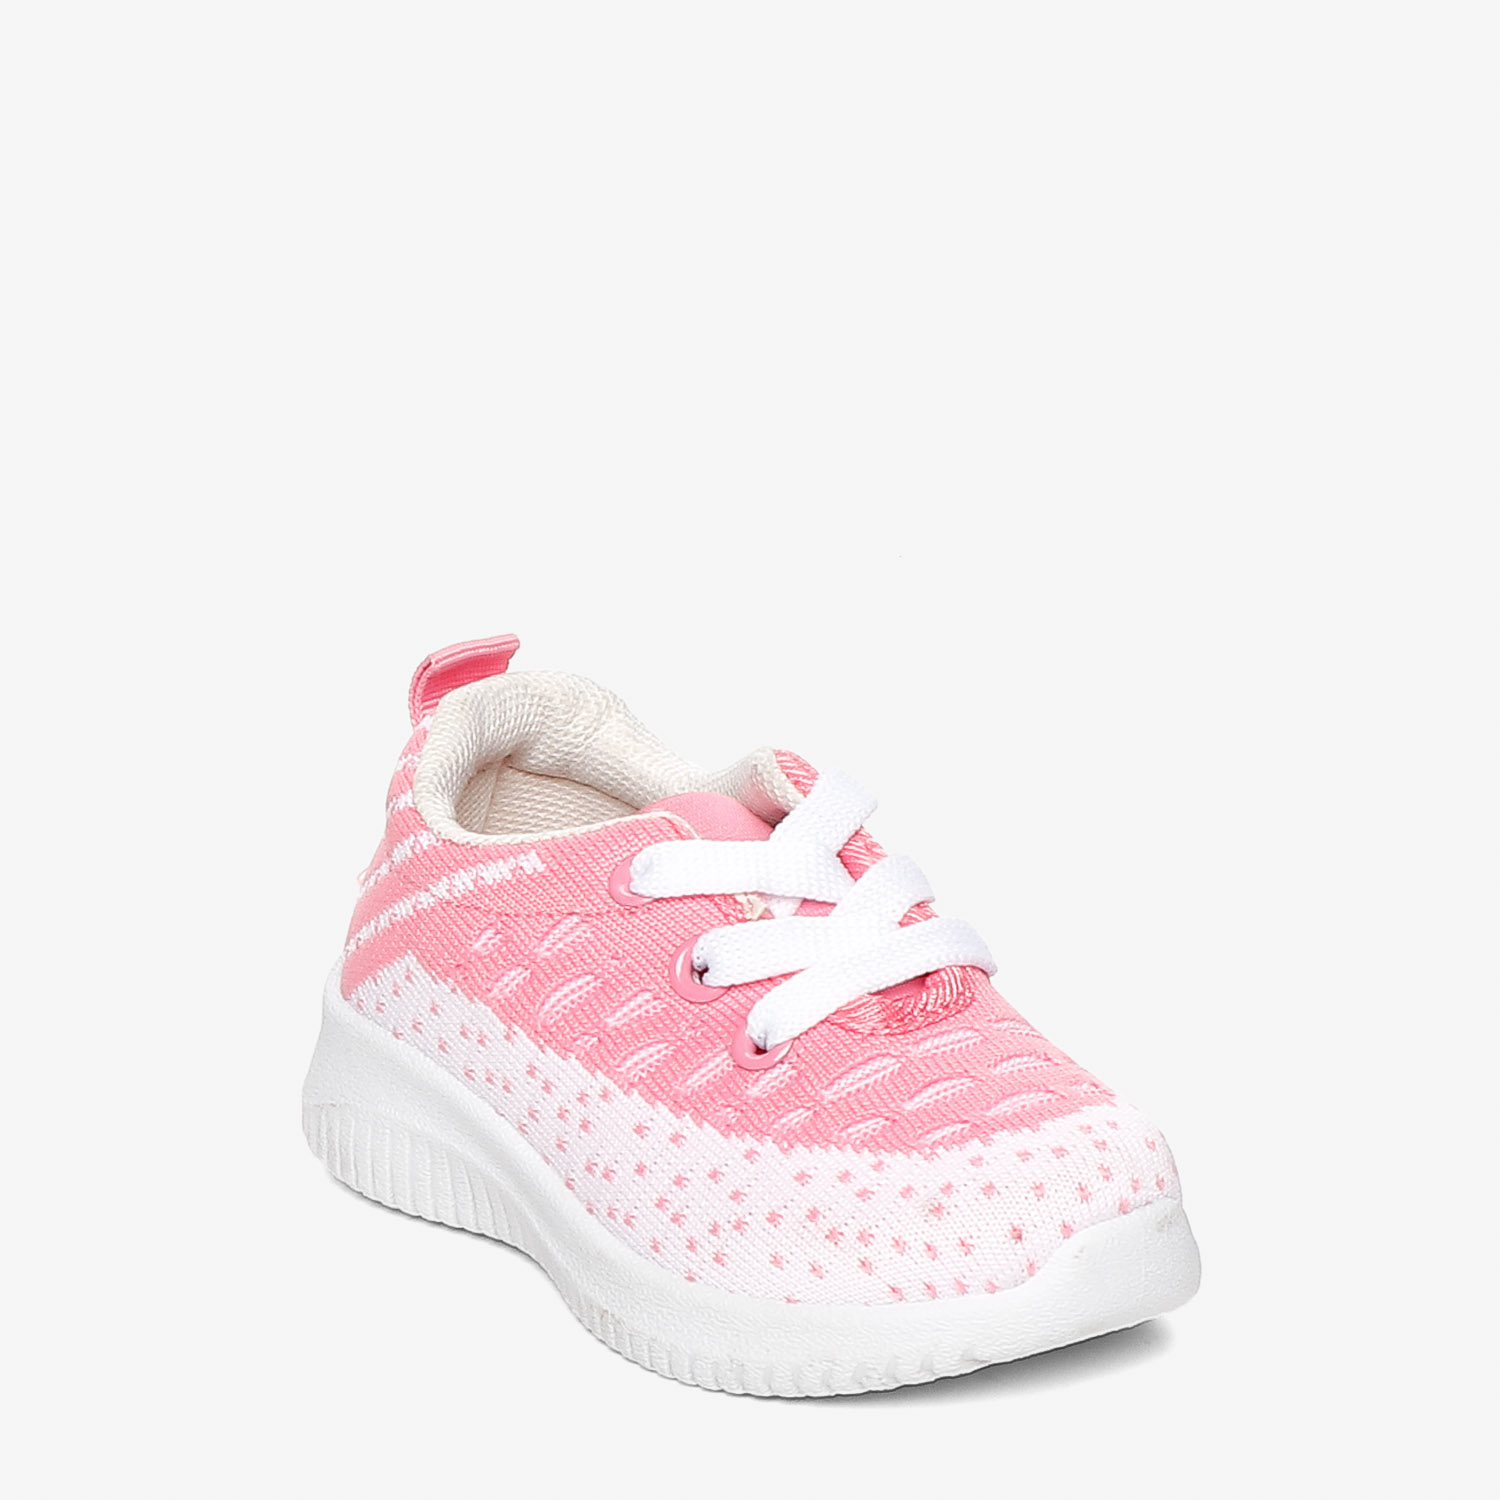 rubber shoes for kids girls